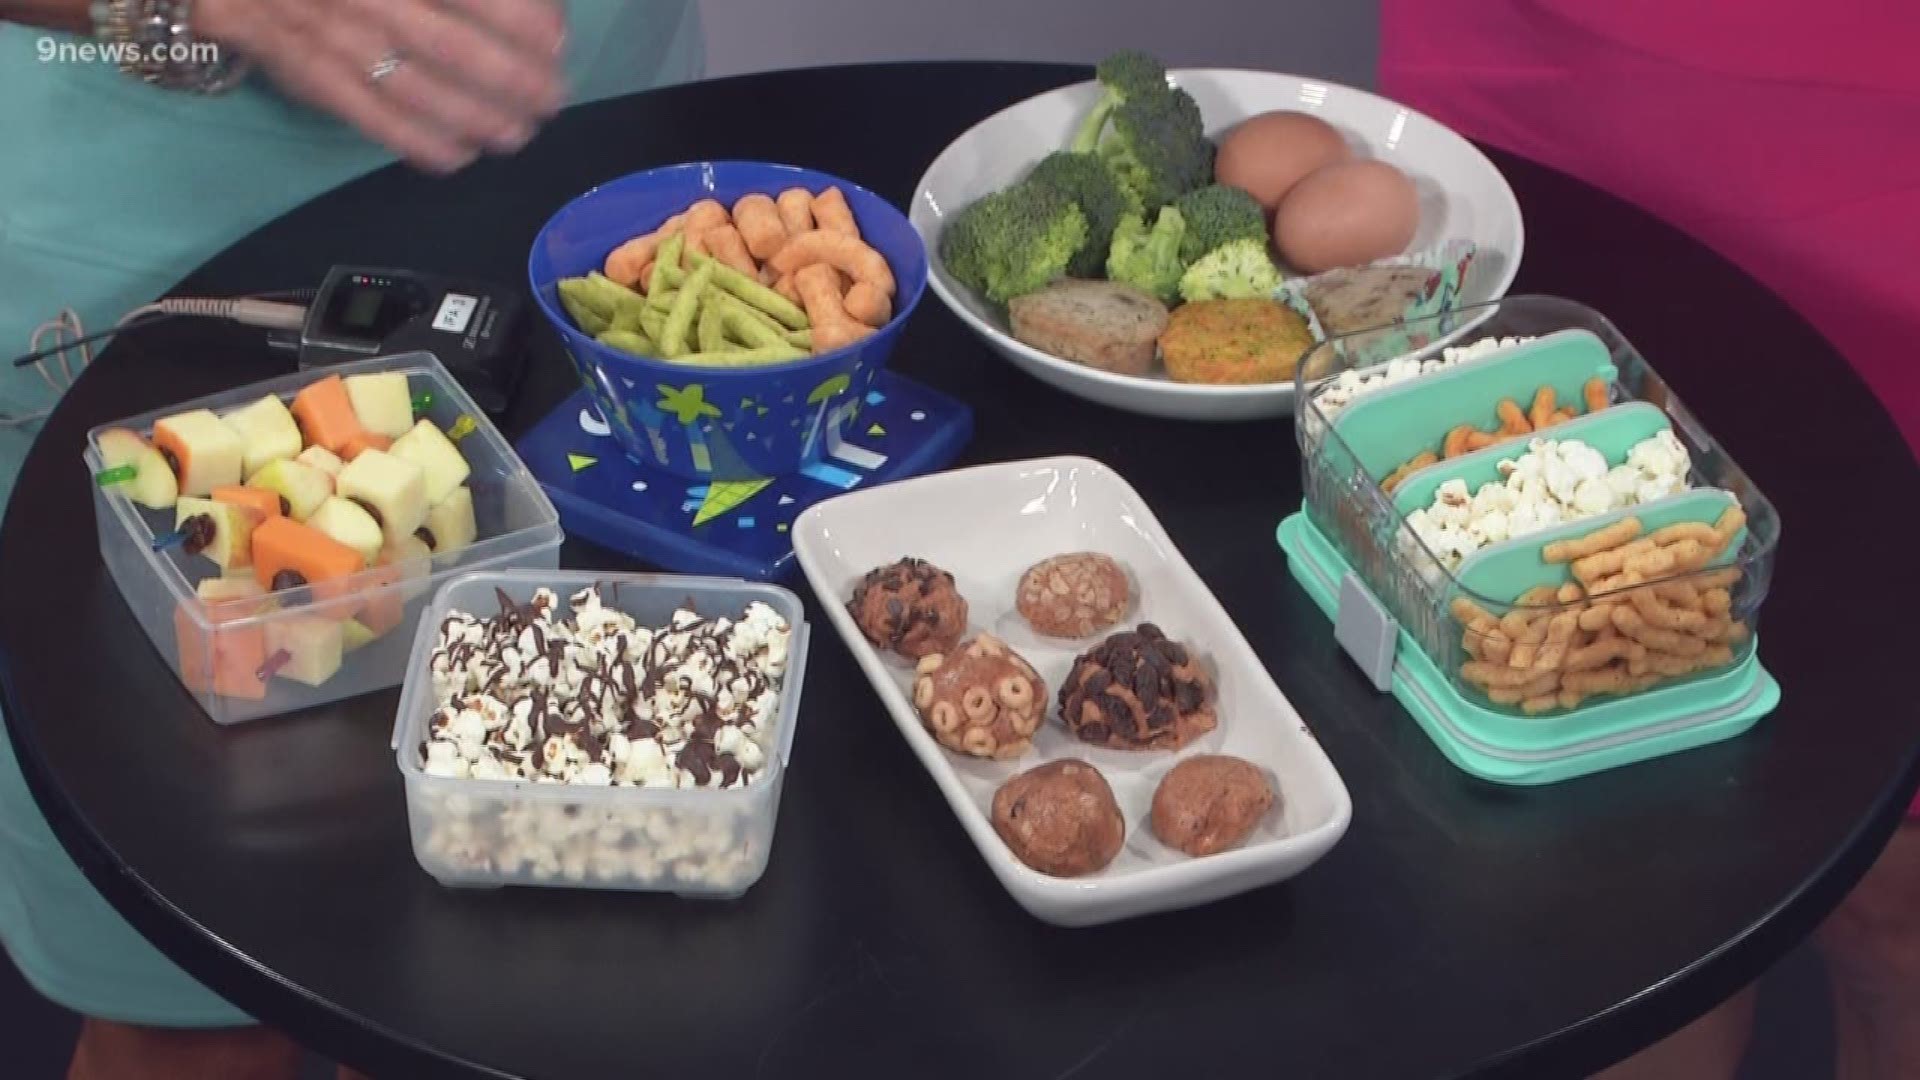 Kids love to snack. In fact, many kids prefer snacks over meals. Nutritionist Kristin Kirkpatrick shares a few ideas for nutritious snacks to pack for students.